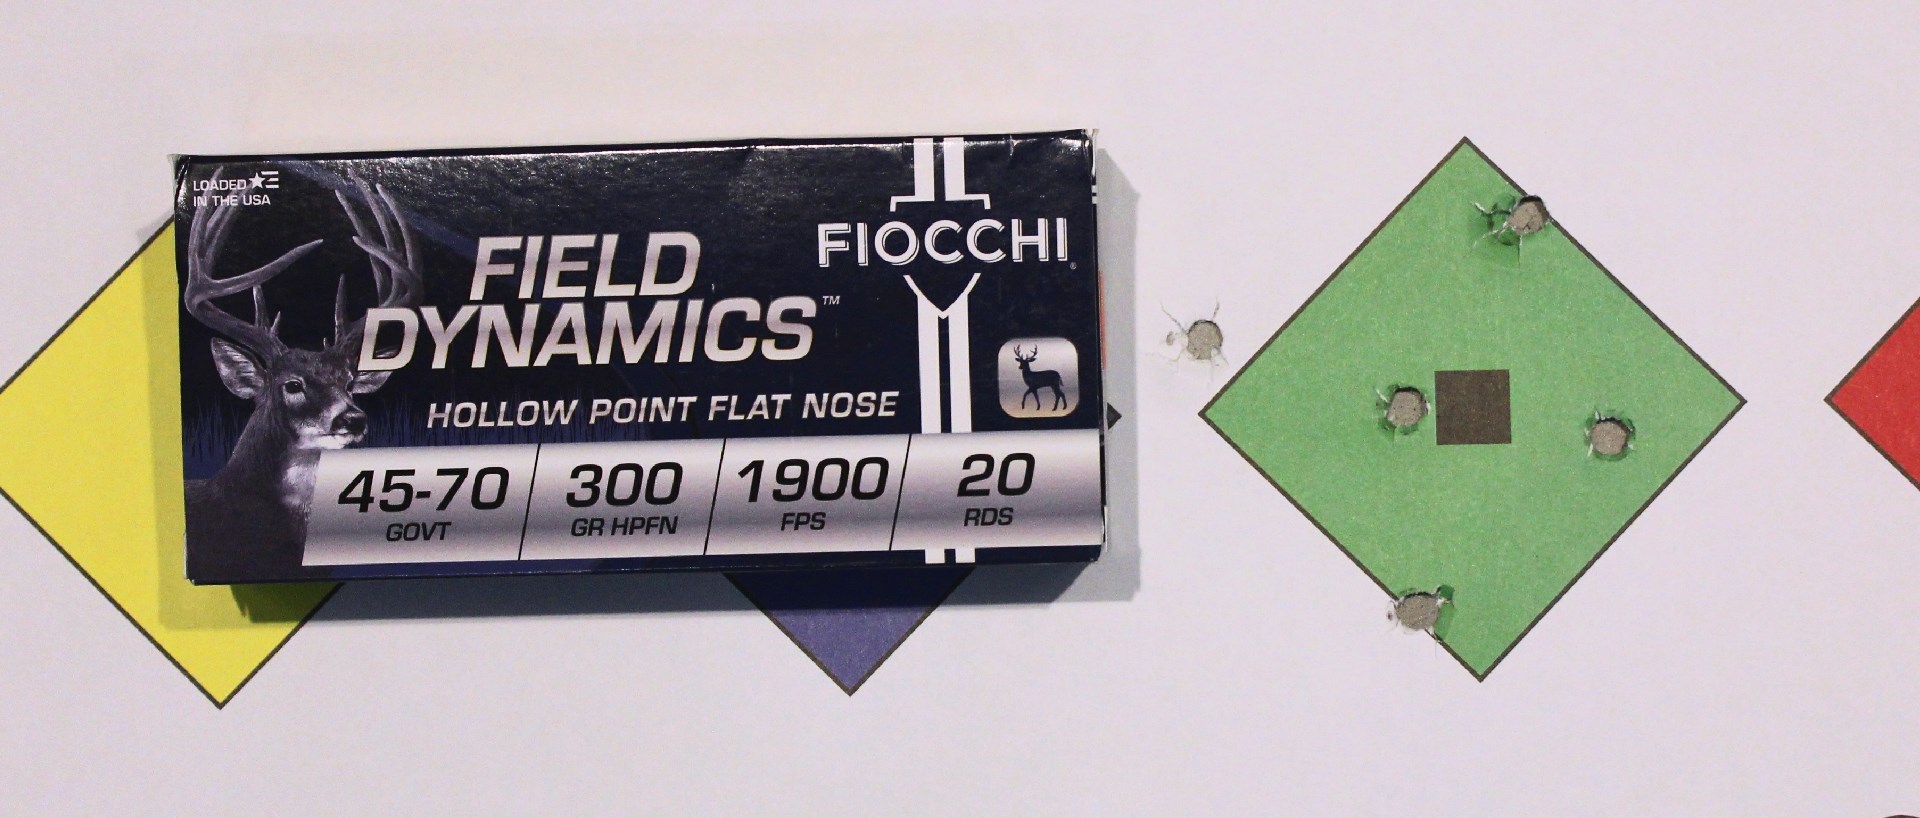 fiocchi field dynamics ammunition box with target diamond colored shapes accuracy group